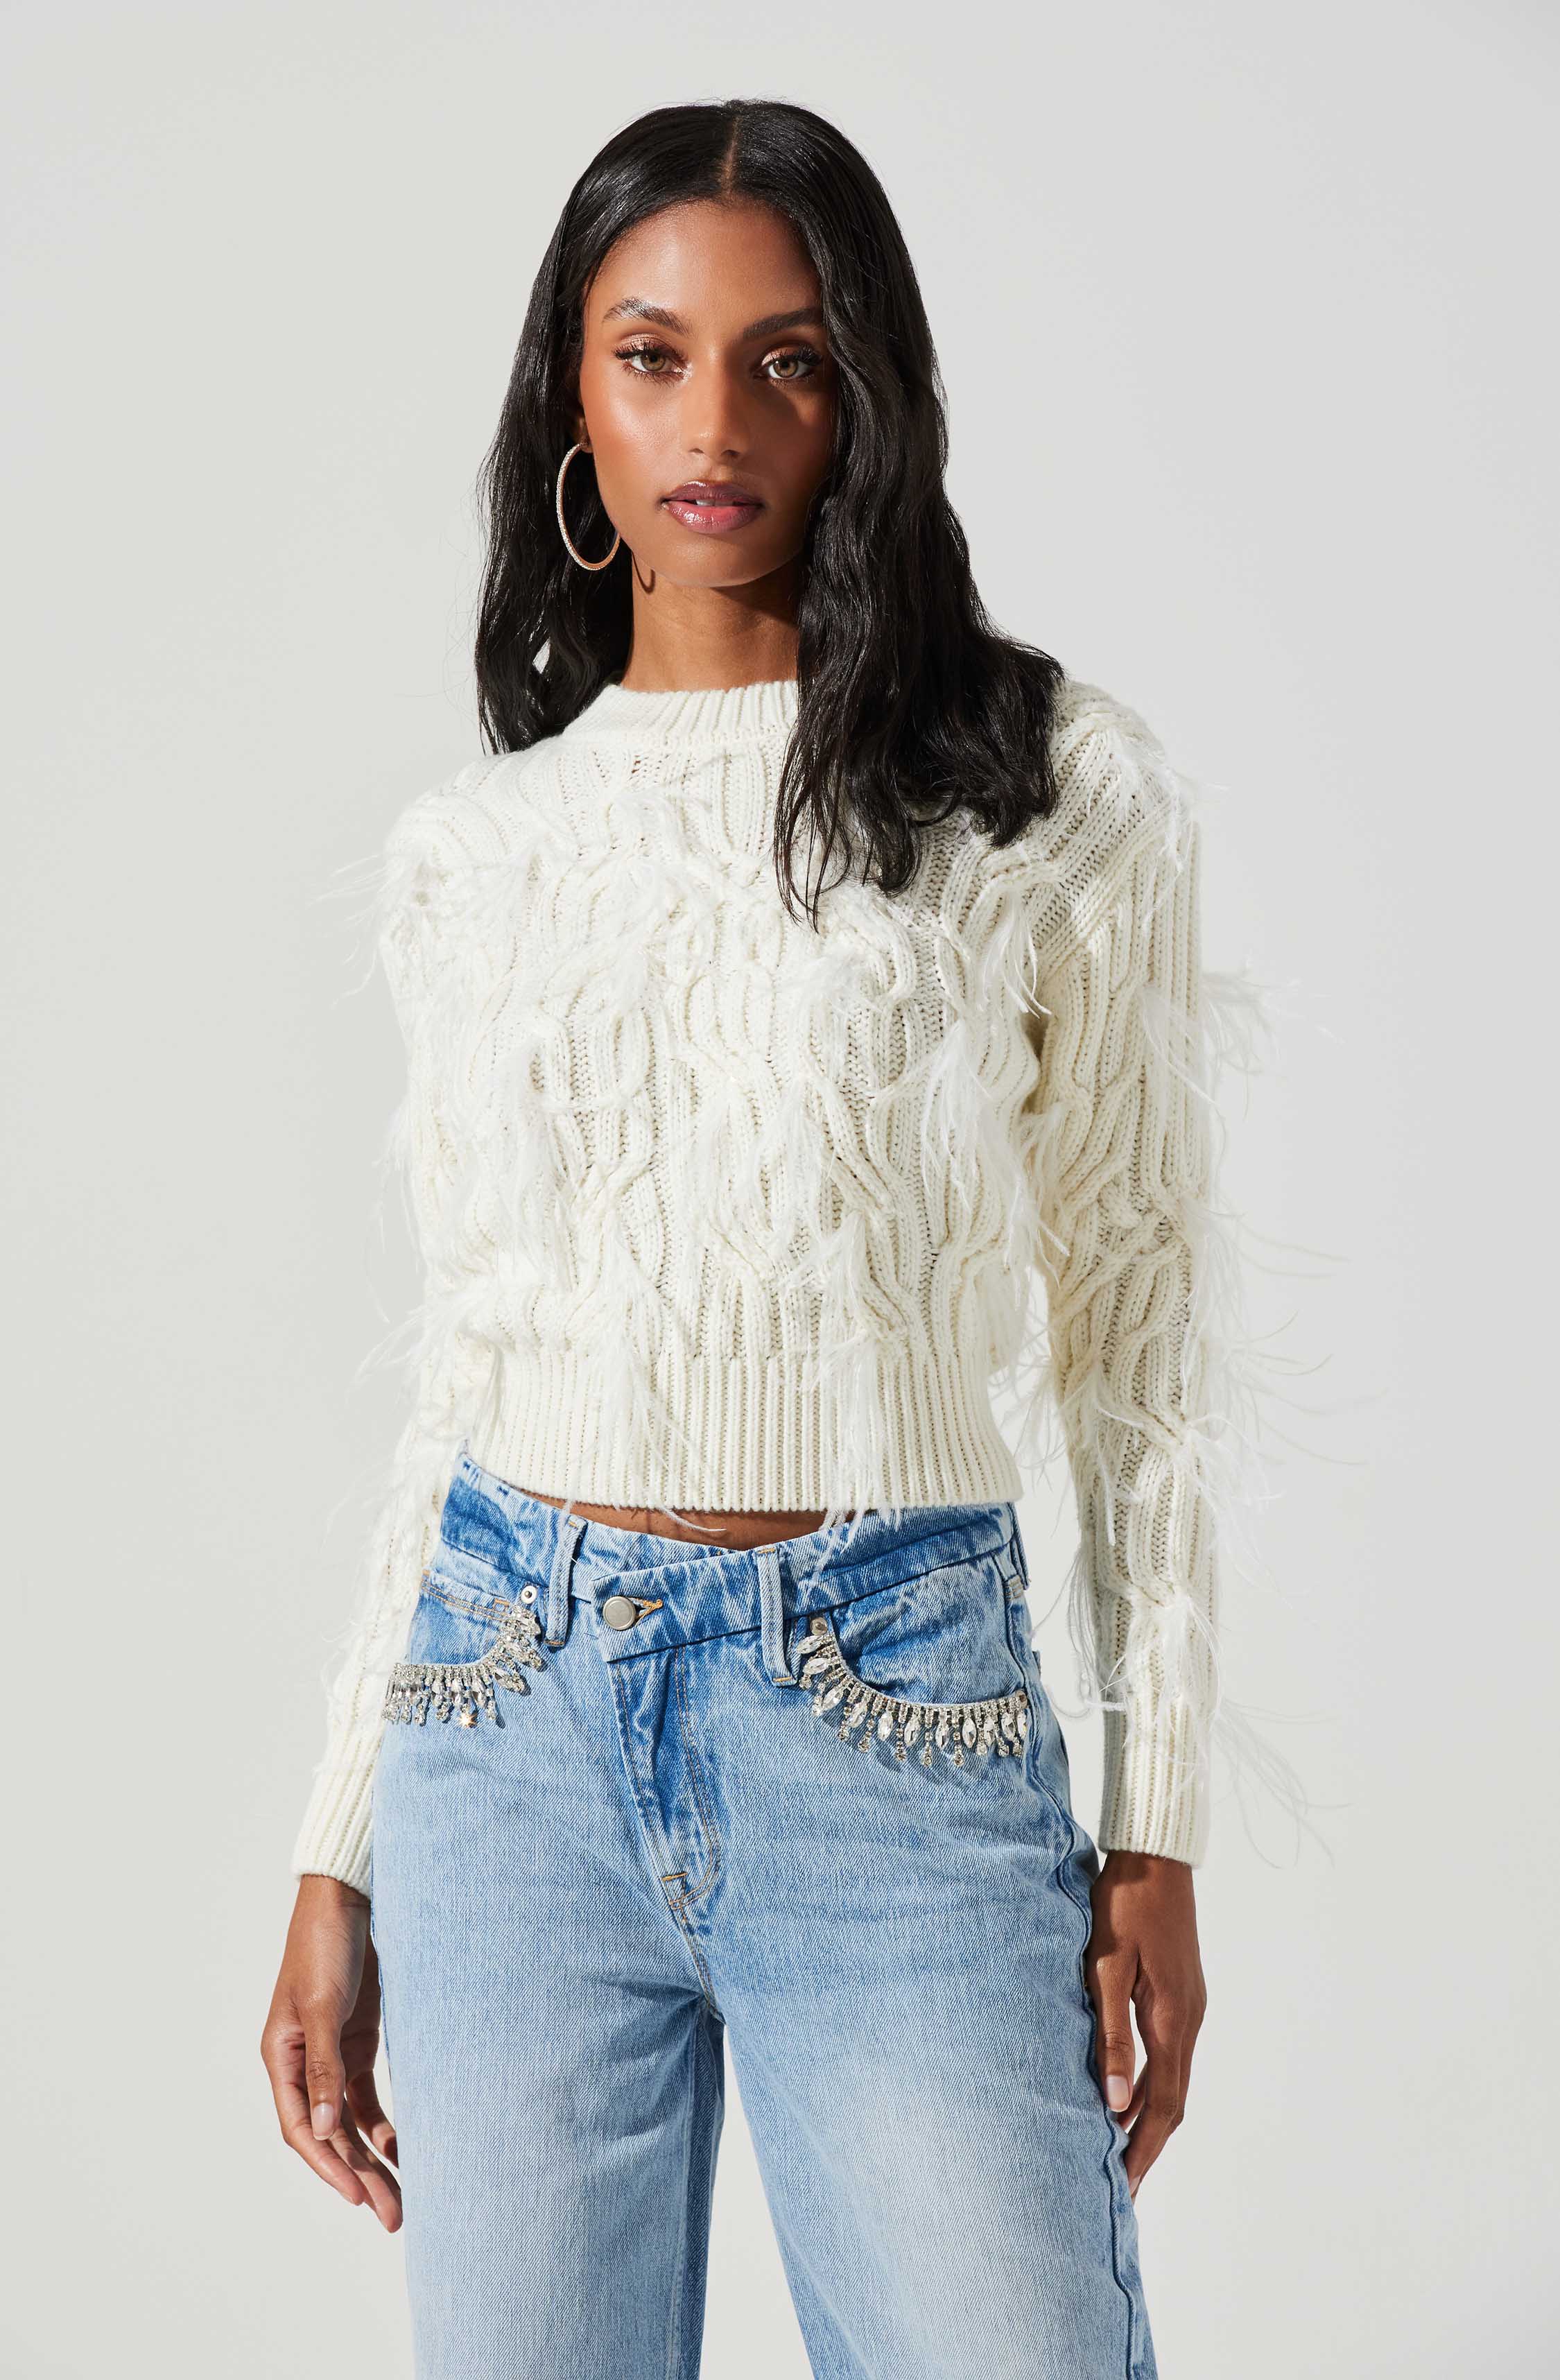 Bershka cut out corset detail knitted top in cream